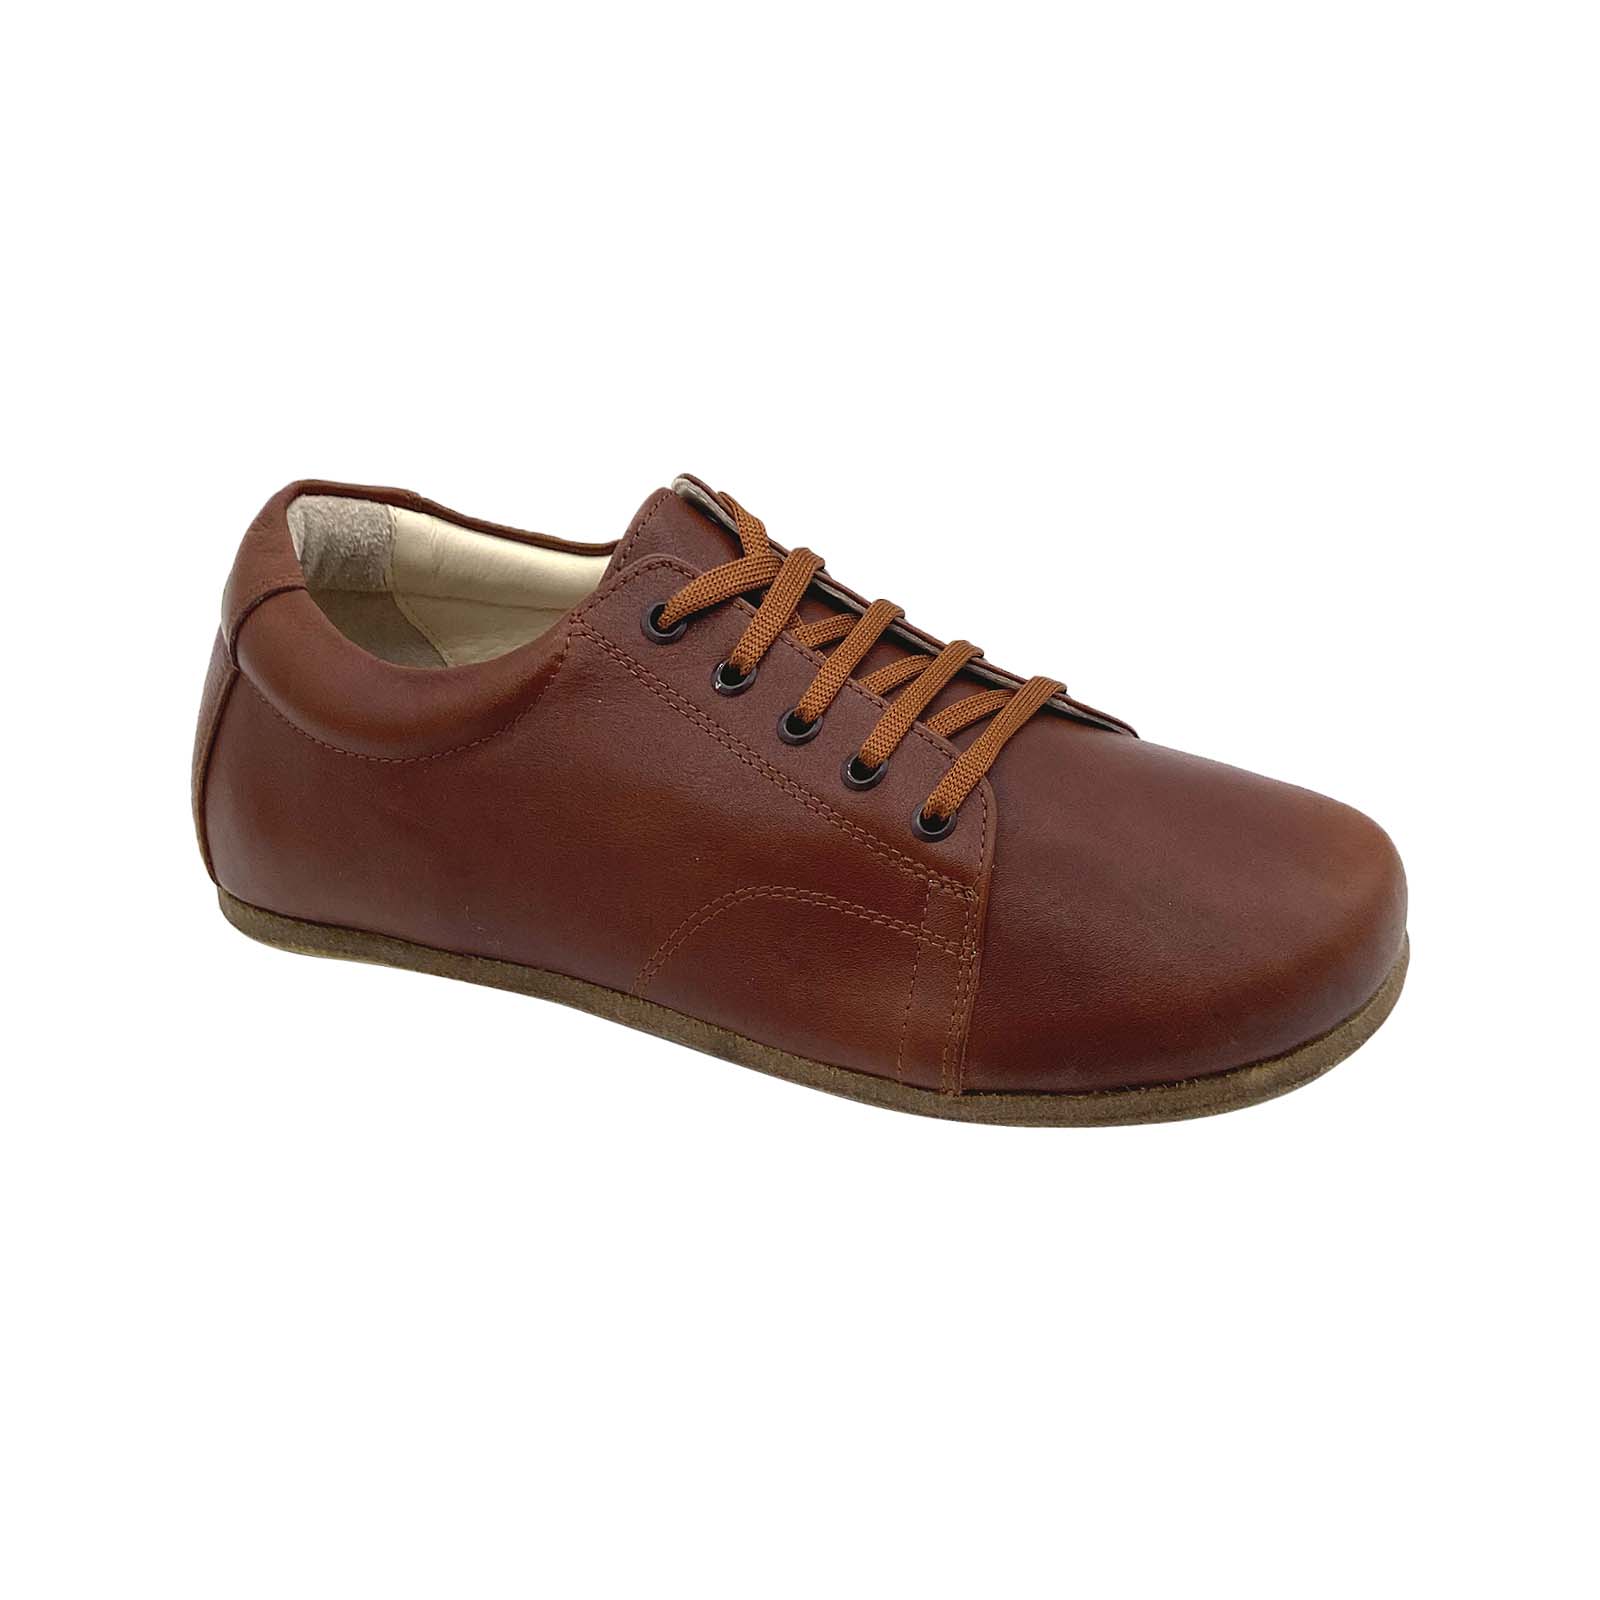 Men's Earthing Shoes Wide with Copper Rivet Walkers